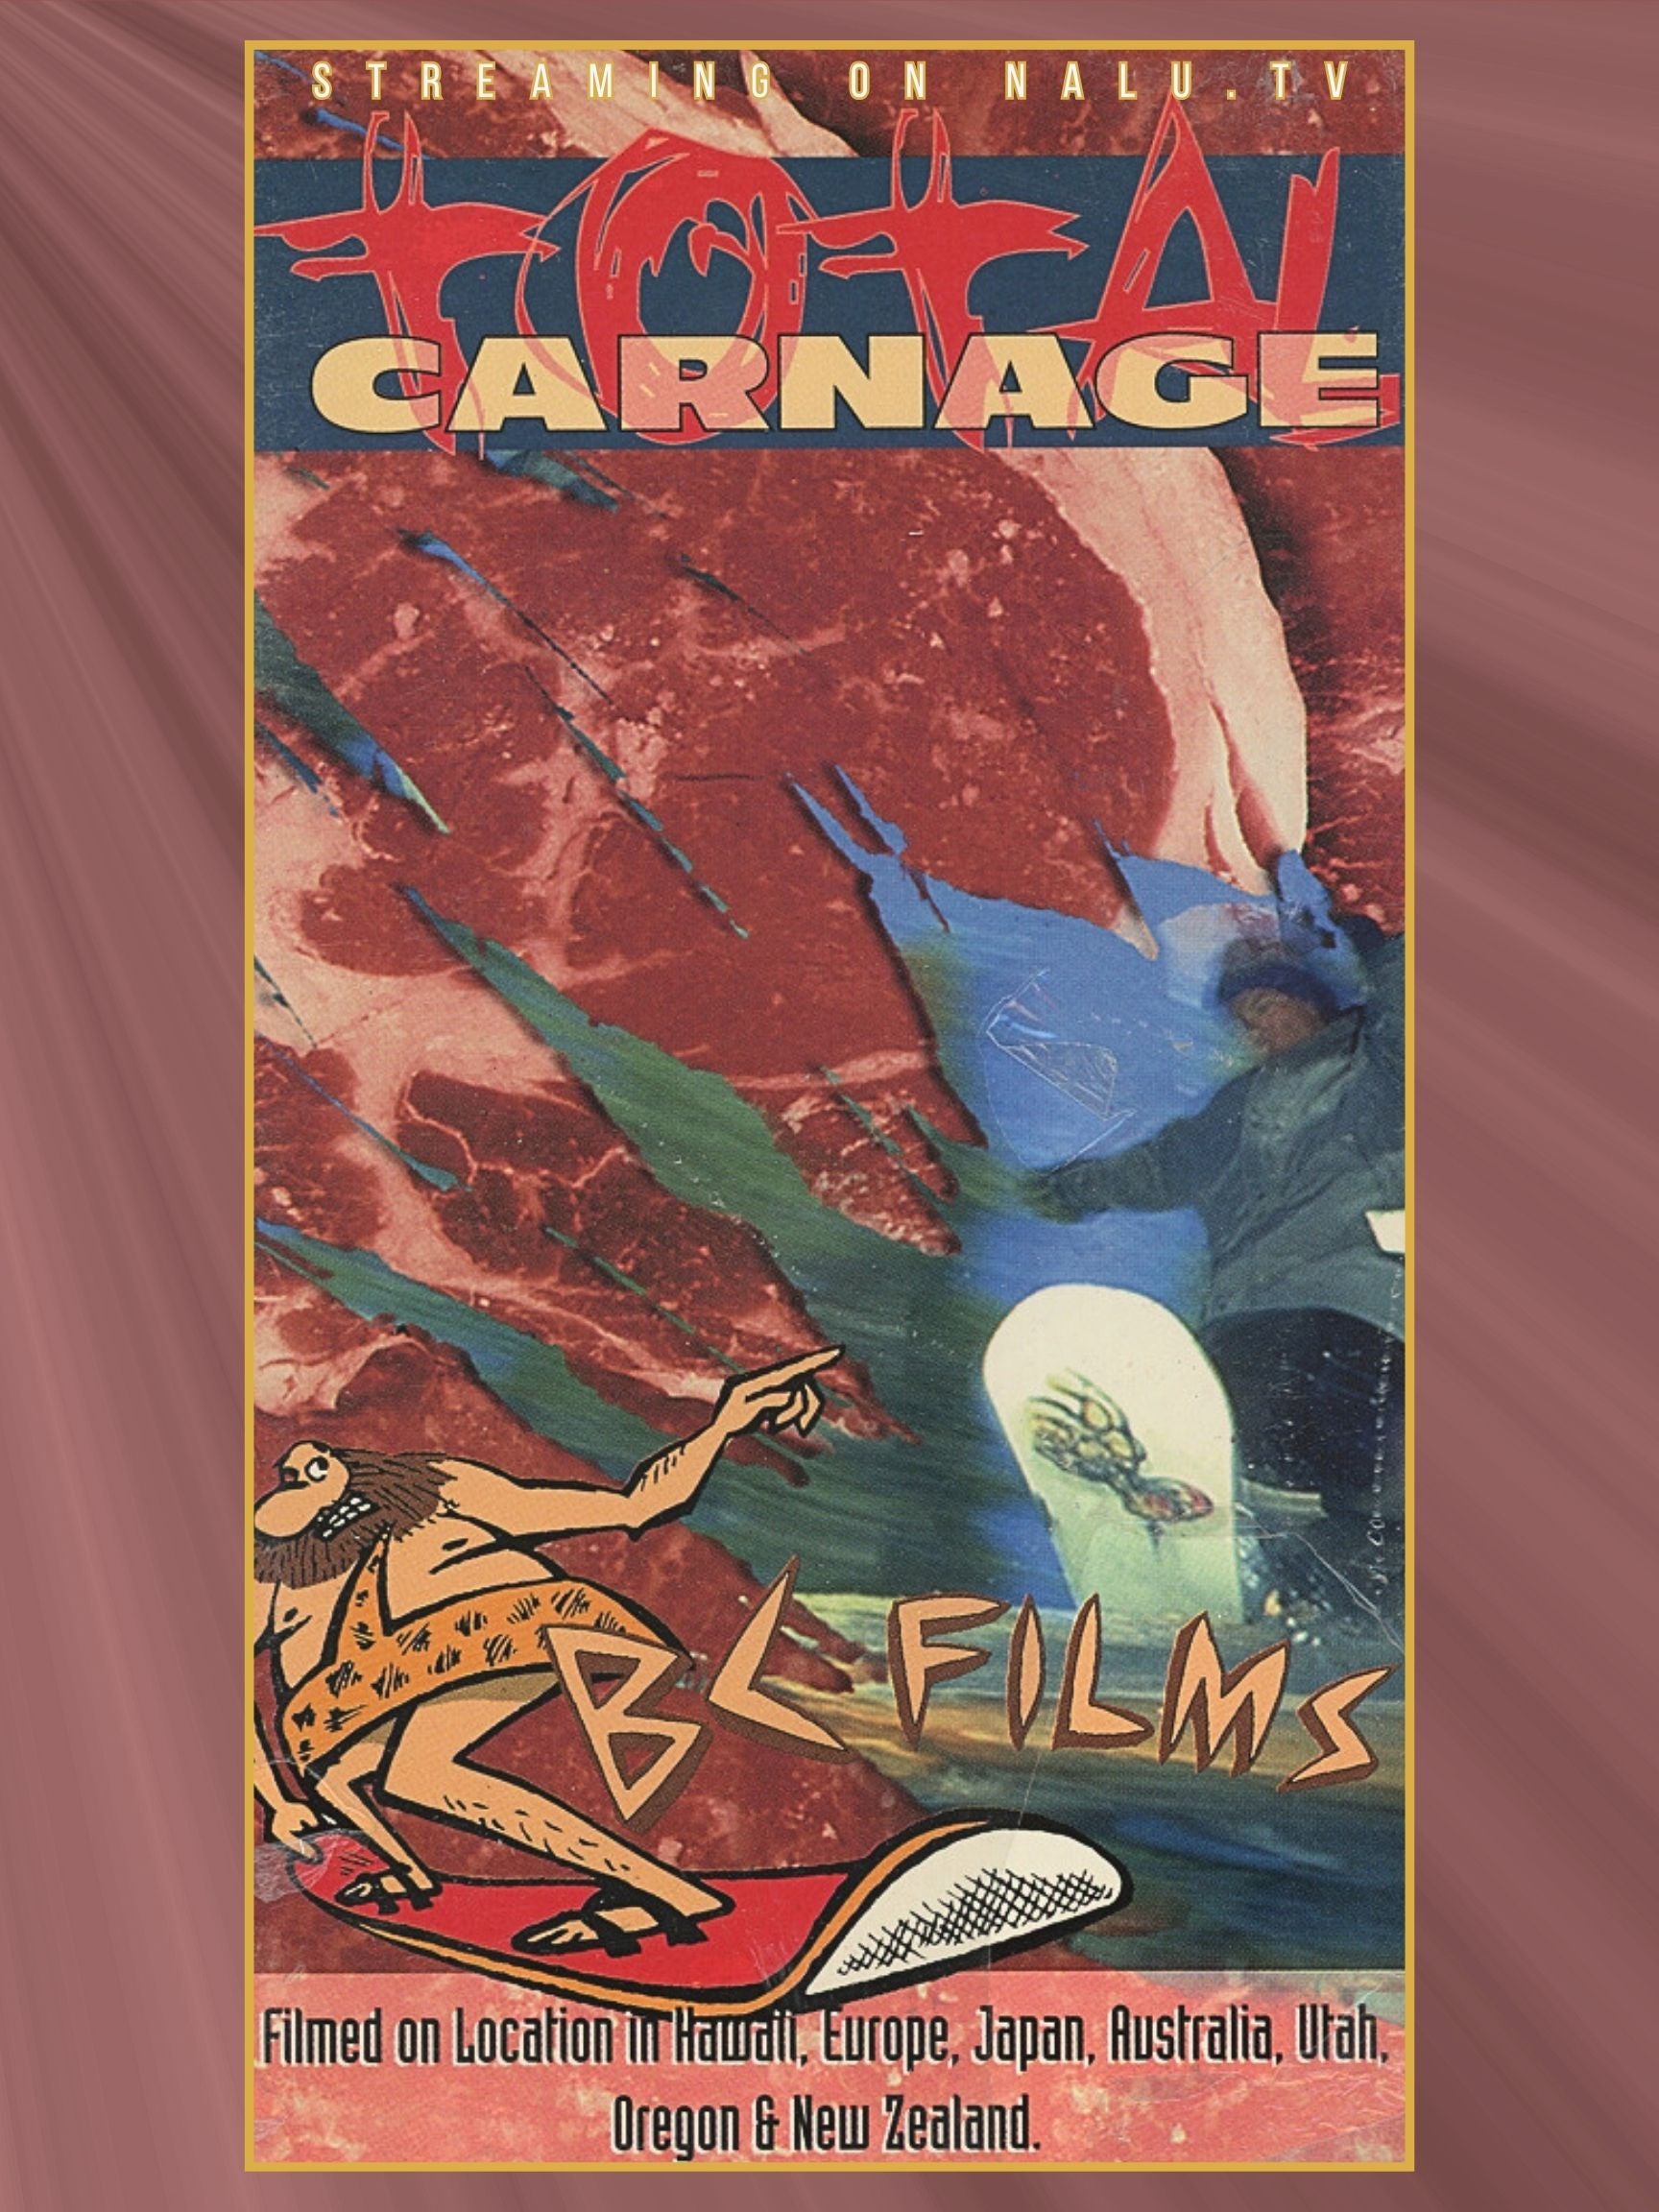 Total Carnage | Stream